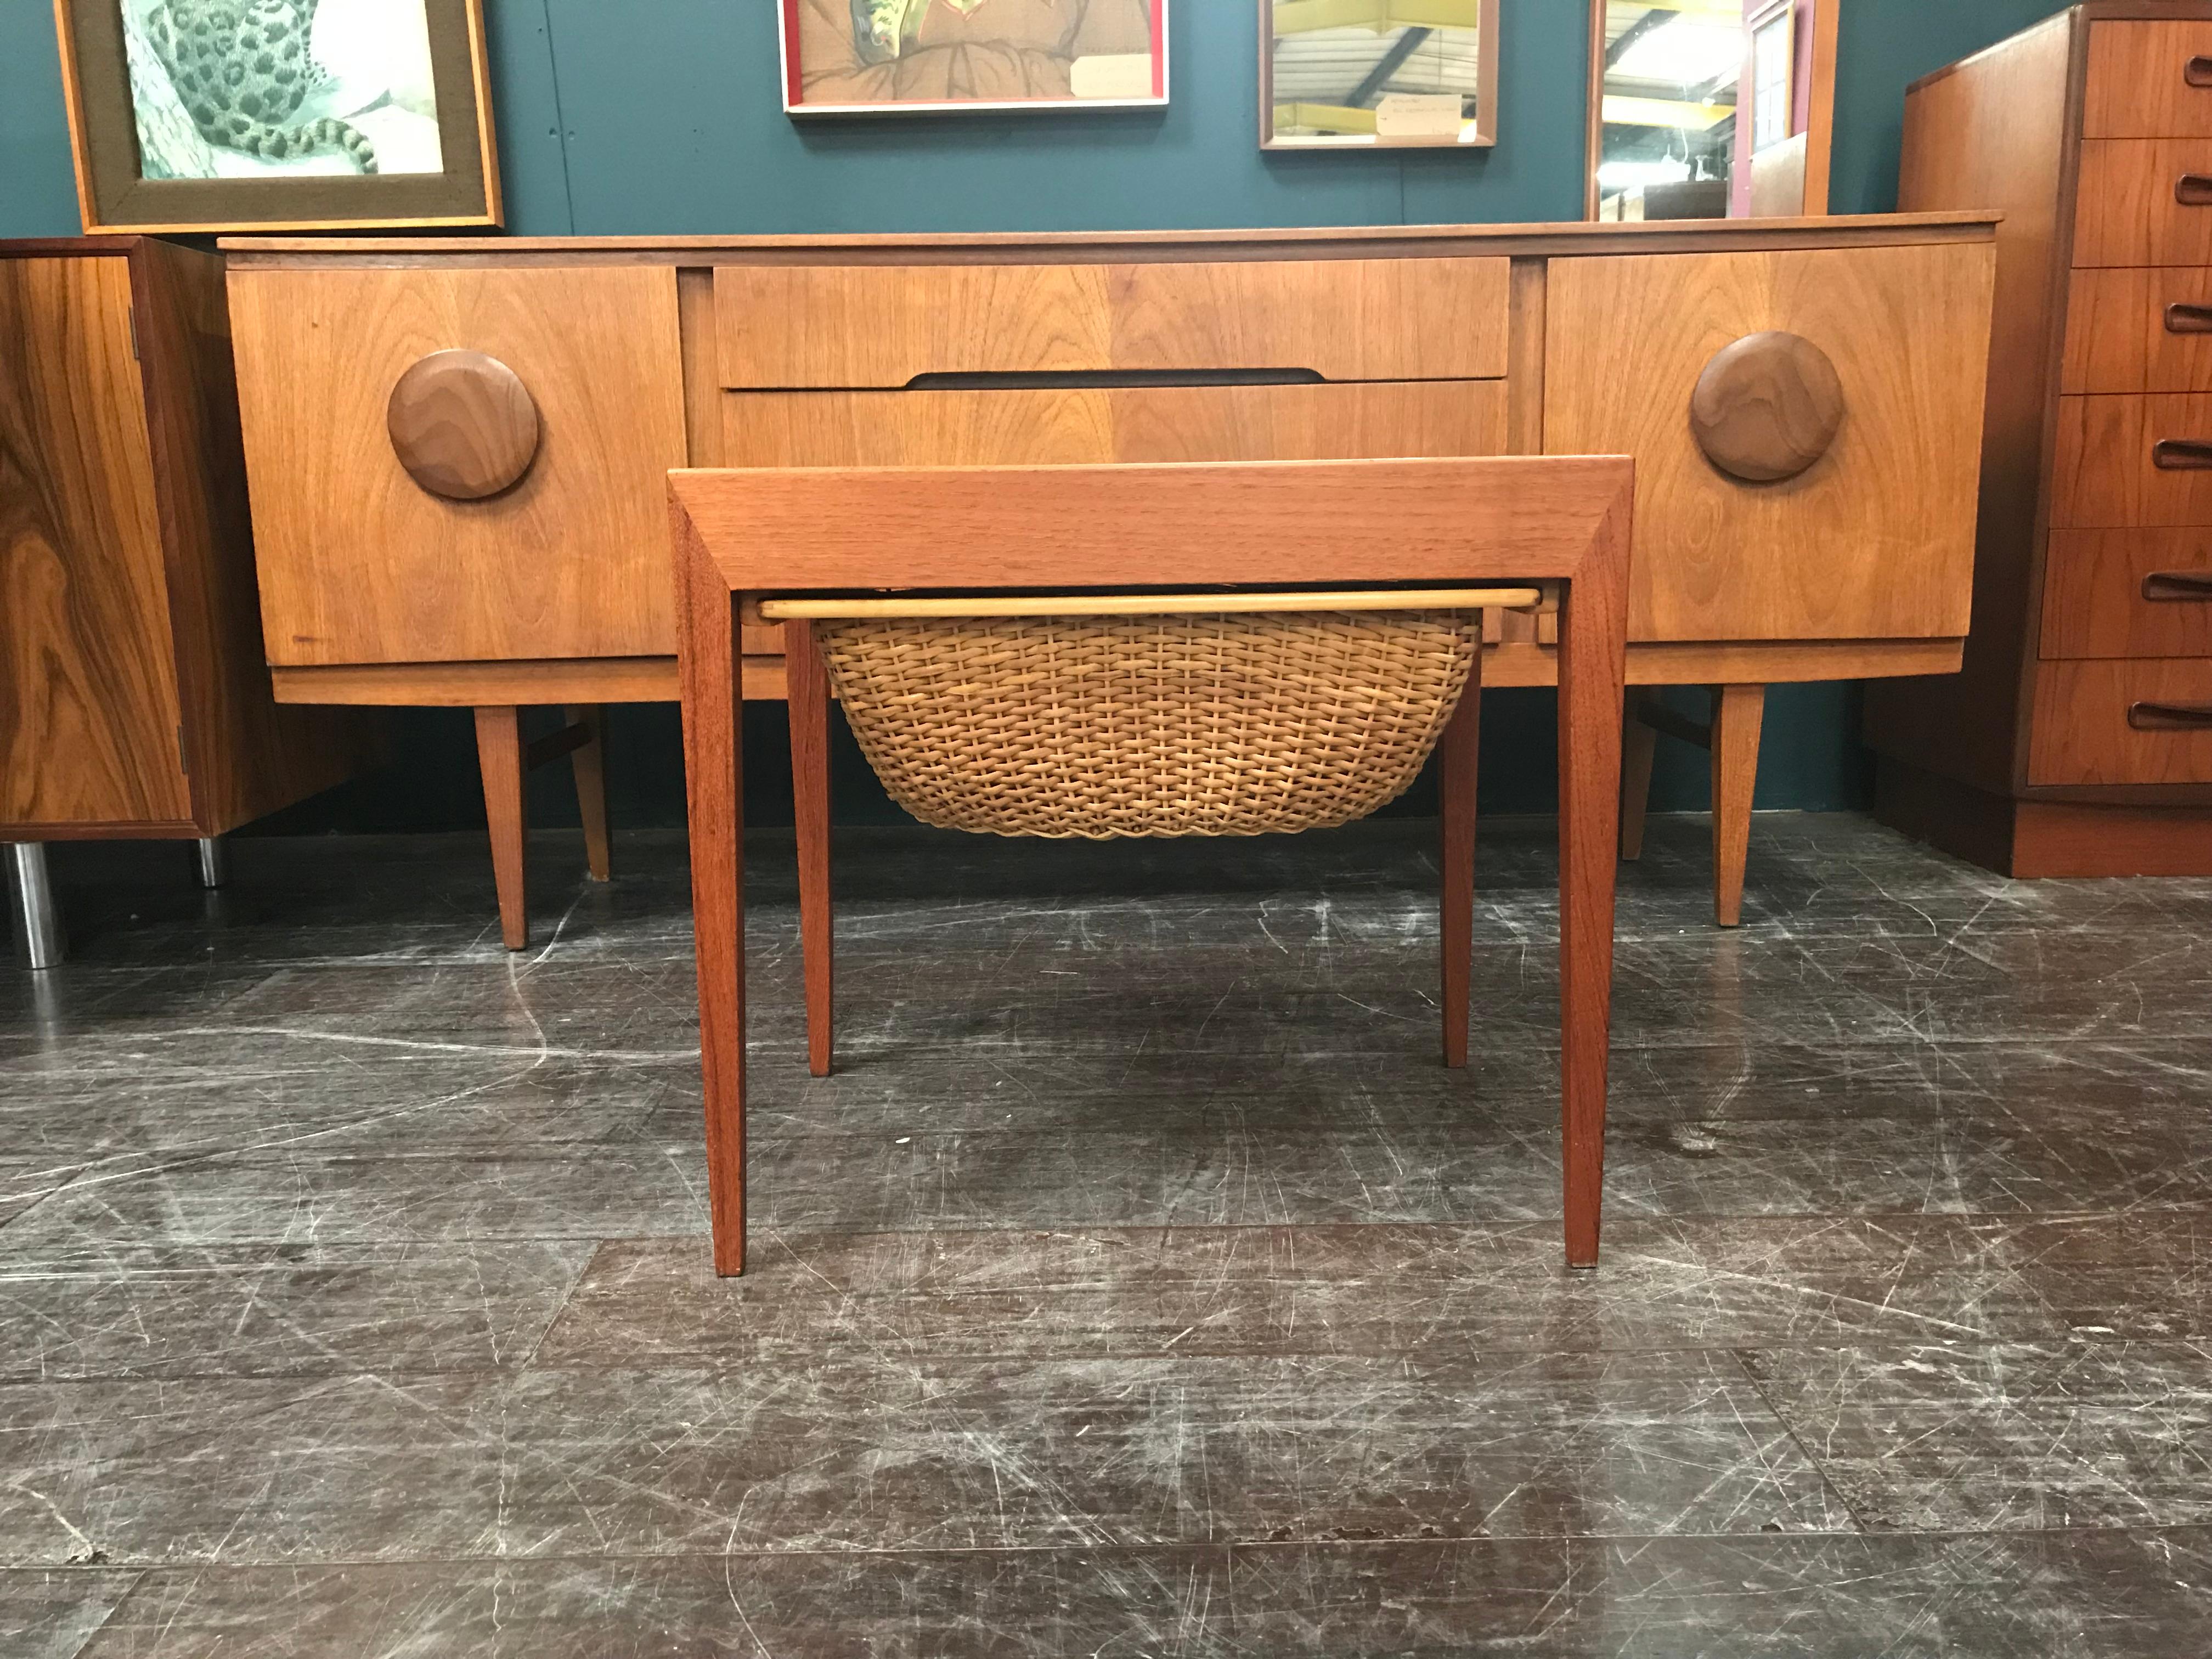 A rare chance to own a highly desirable piece of midcentury design. This little sewing table is beautifully made and can be used for a variety of purposes. Set on wheels, the trolley is easily wheeled to where it is needed but can be stored away